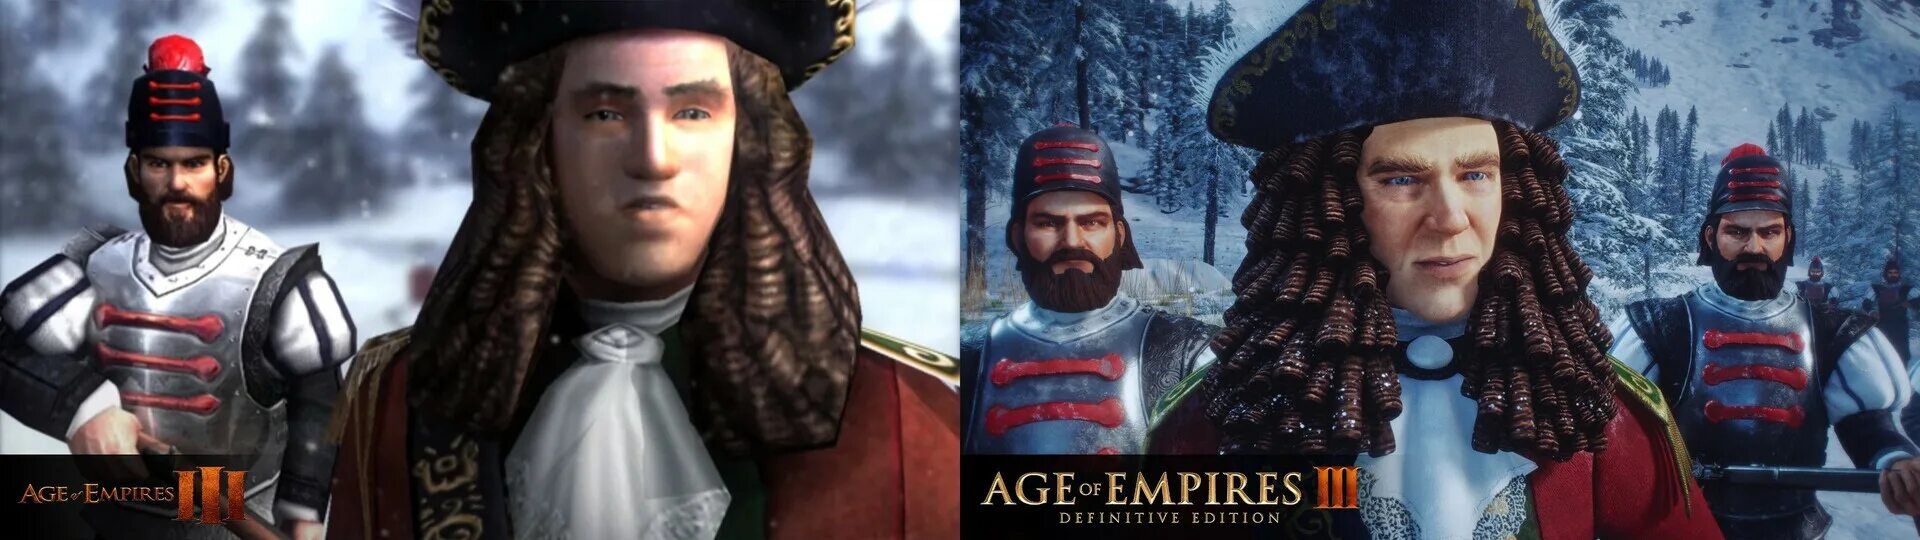 Age of Empires III: Definitive Edition. Age of Empires 3 ремастер. Age of Empires III (3): Definitive Edition. Age of Empires 3 Definitive.